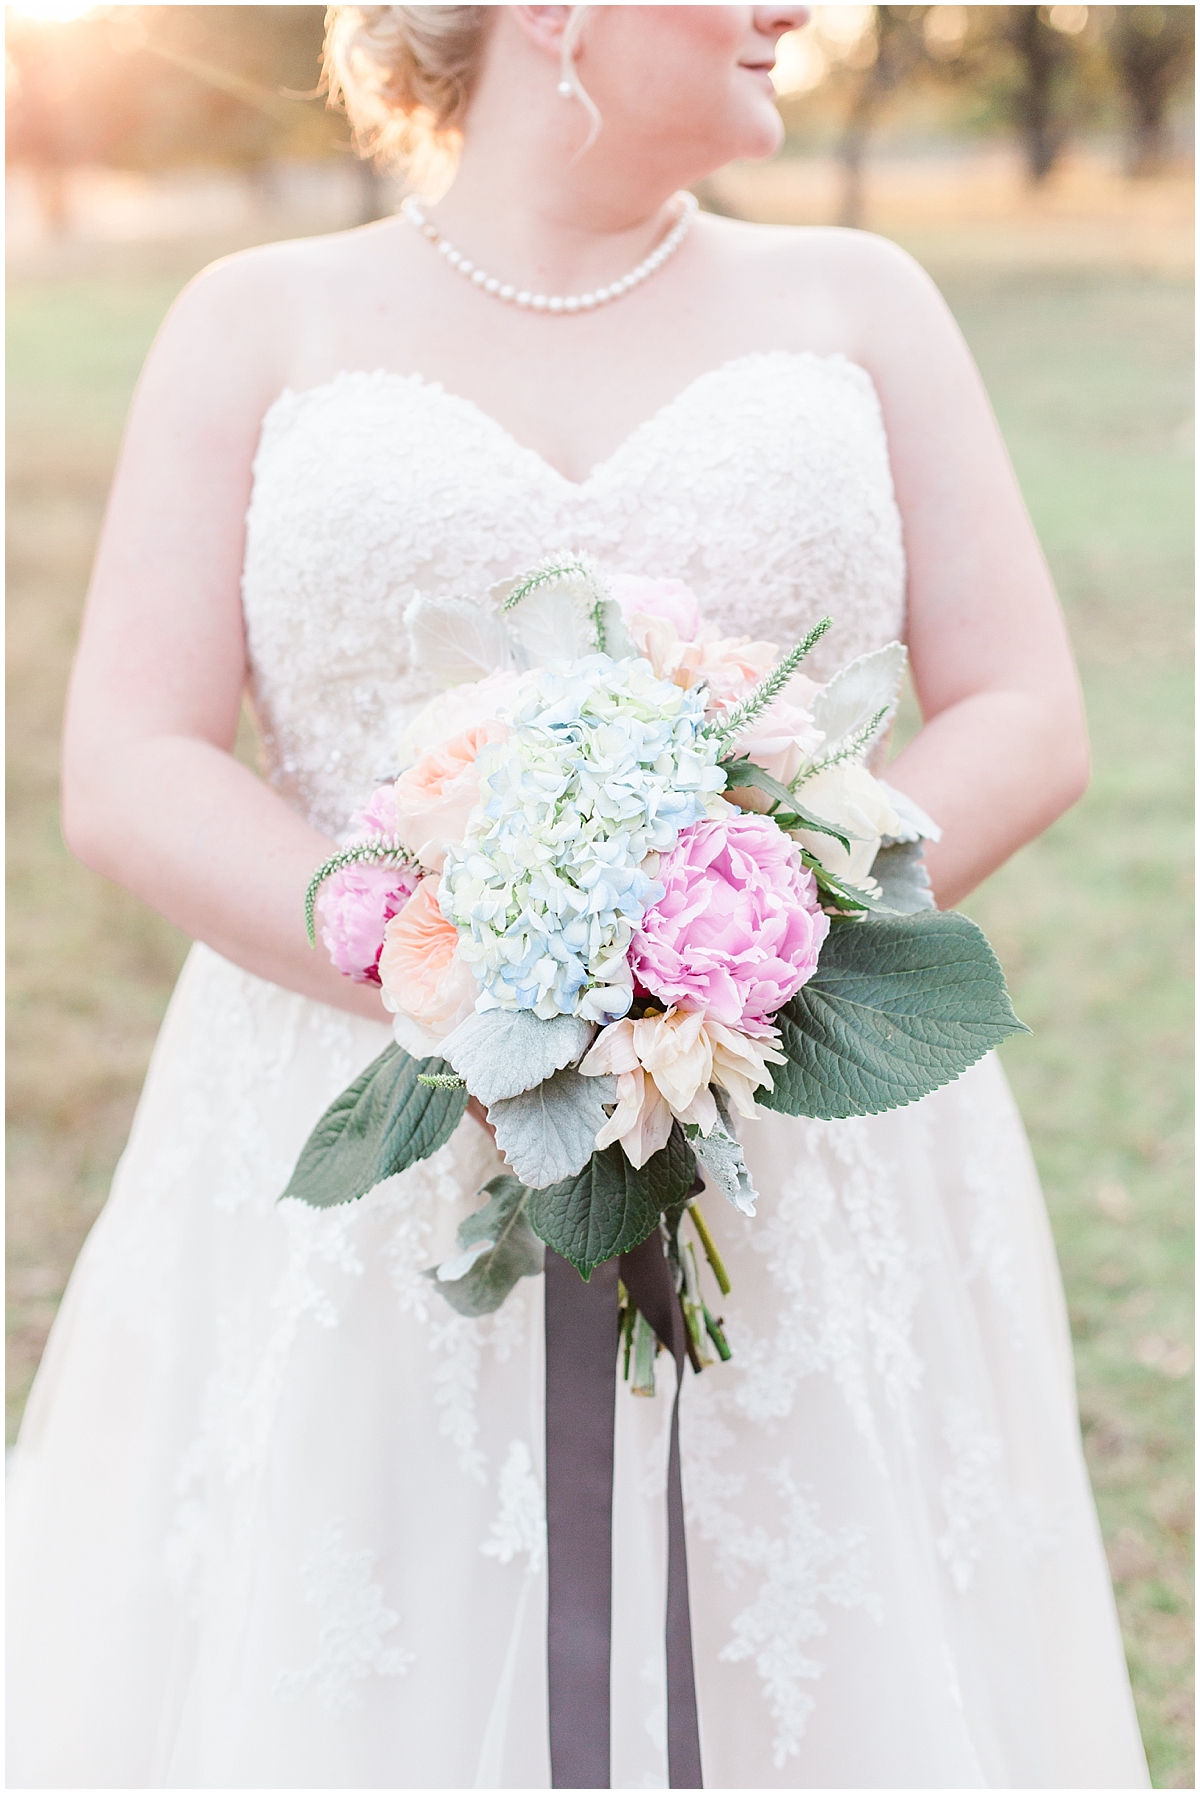 a-slate-blue-and-grey-winter-wedding-at-cw-hill-country-ranch-in-boerne-texas-by-allison-jeffers-wedding-photography_0092